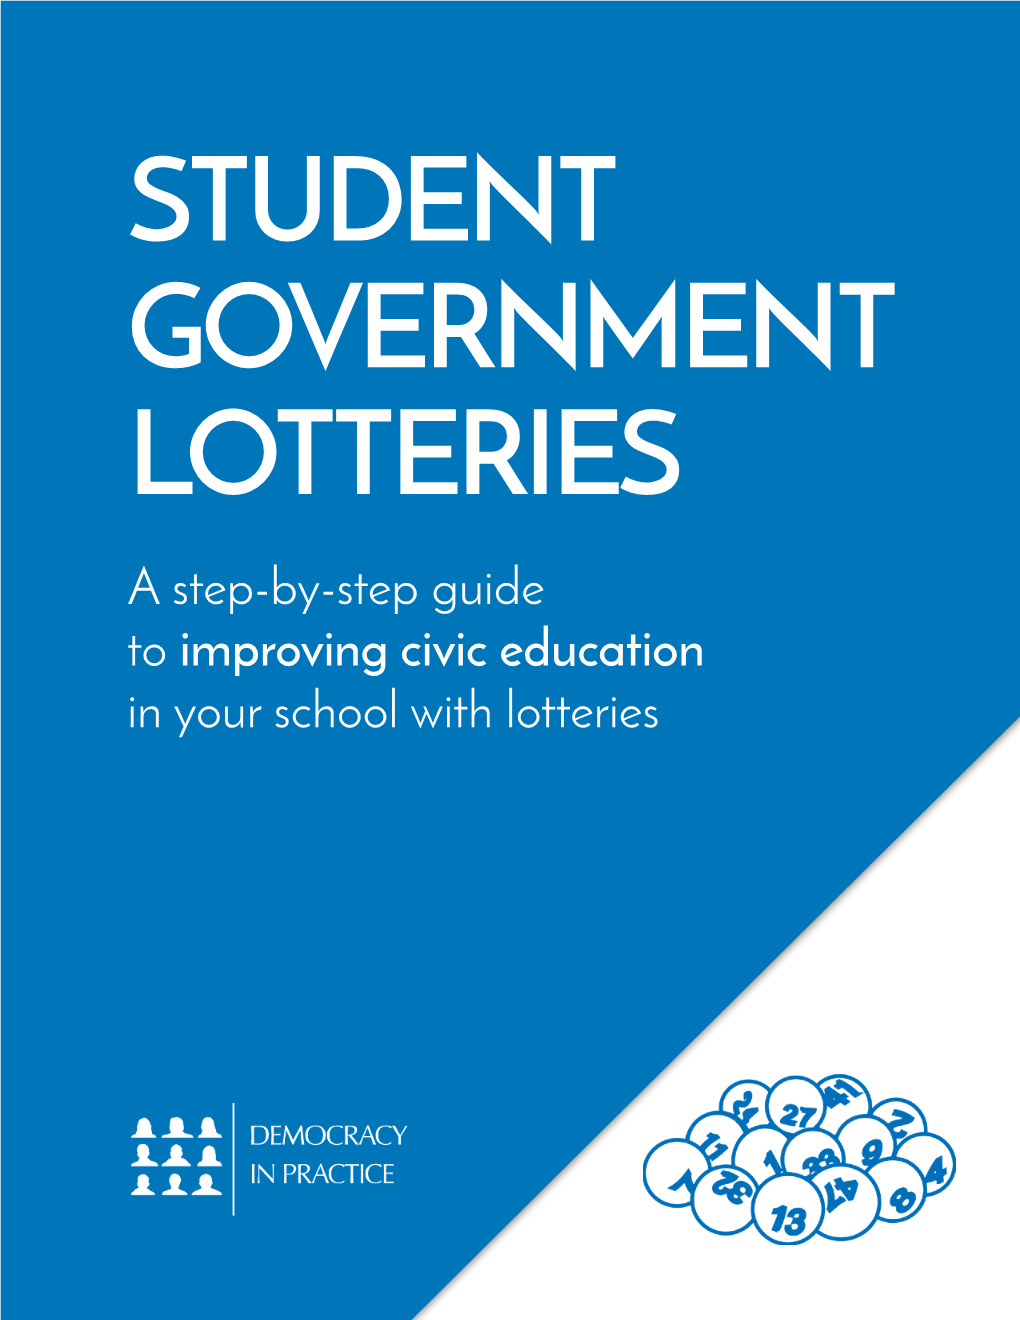 STUDENT GOVERNMENT LOTTERIES a Step-By-Step Guide to Improving Civic Education in Your School with Lotteries About This Guide